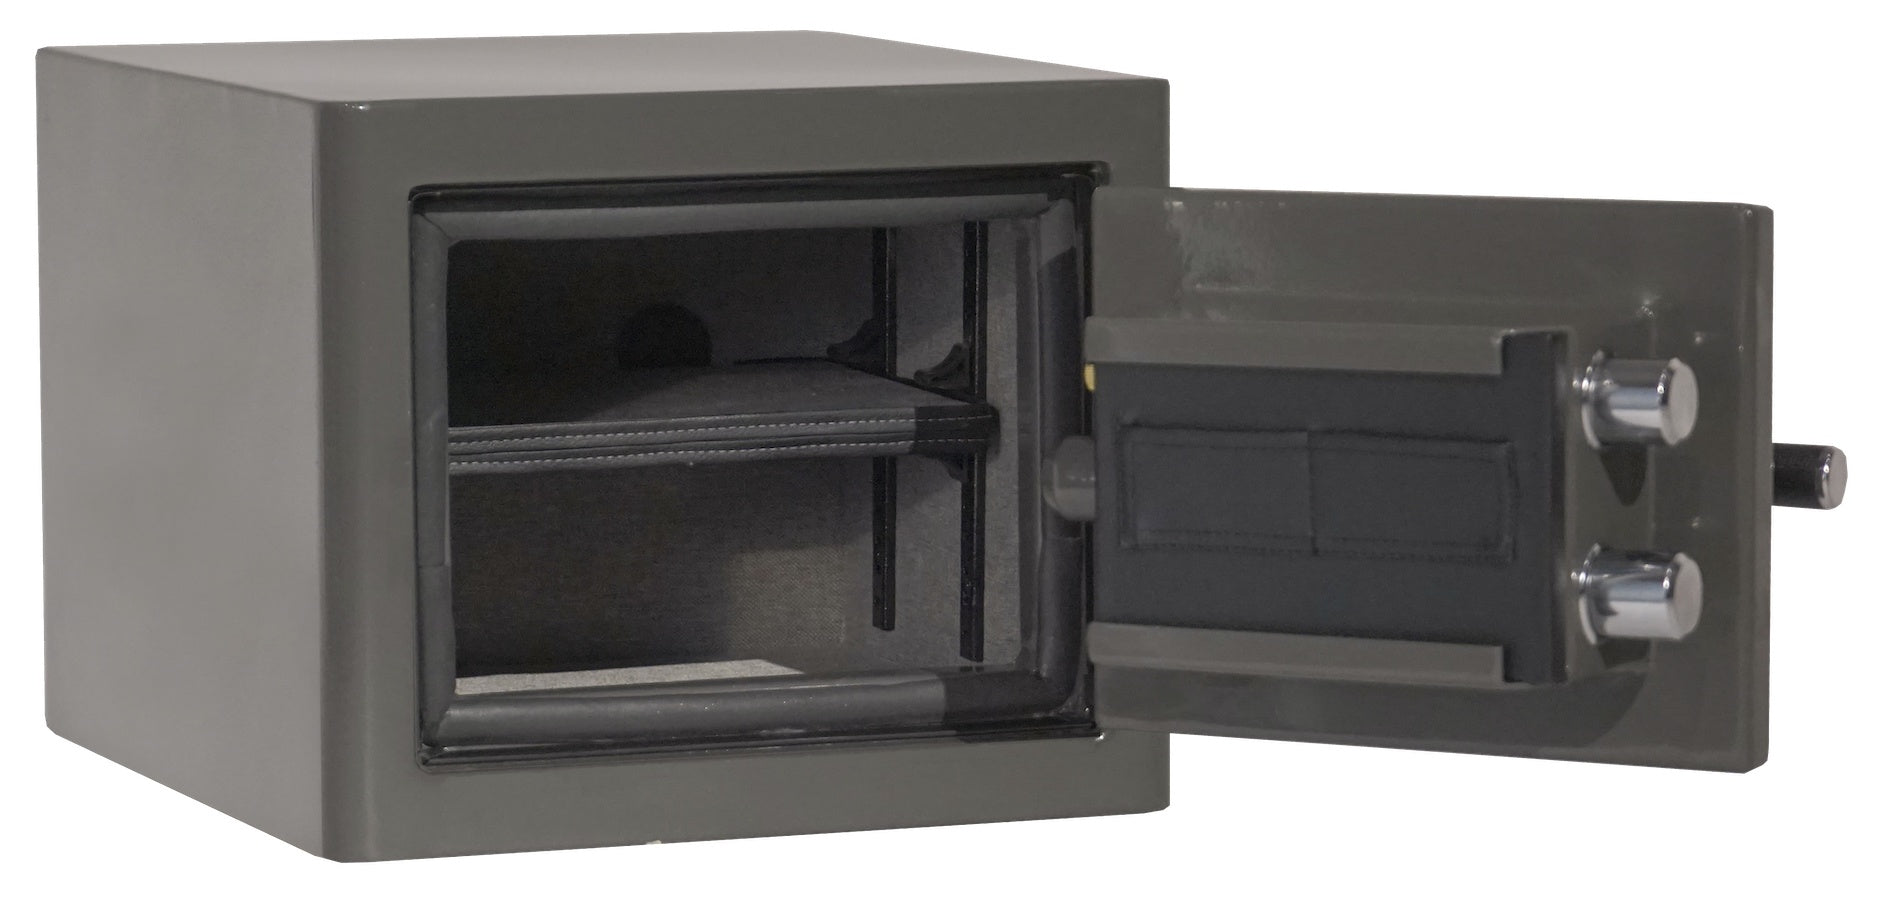 Fireproof Safes & Waterproof Chests - Sports Afield SA-H1 Sanctuary Platinum Series Home & Office Safe